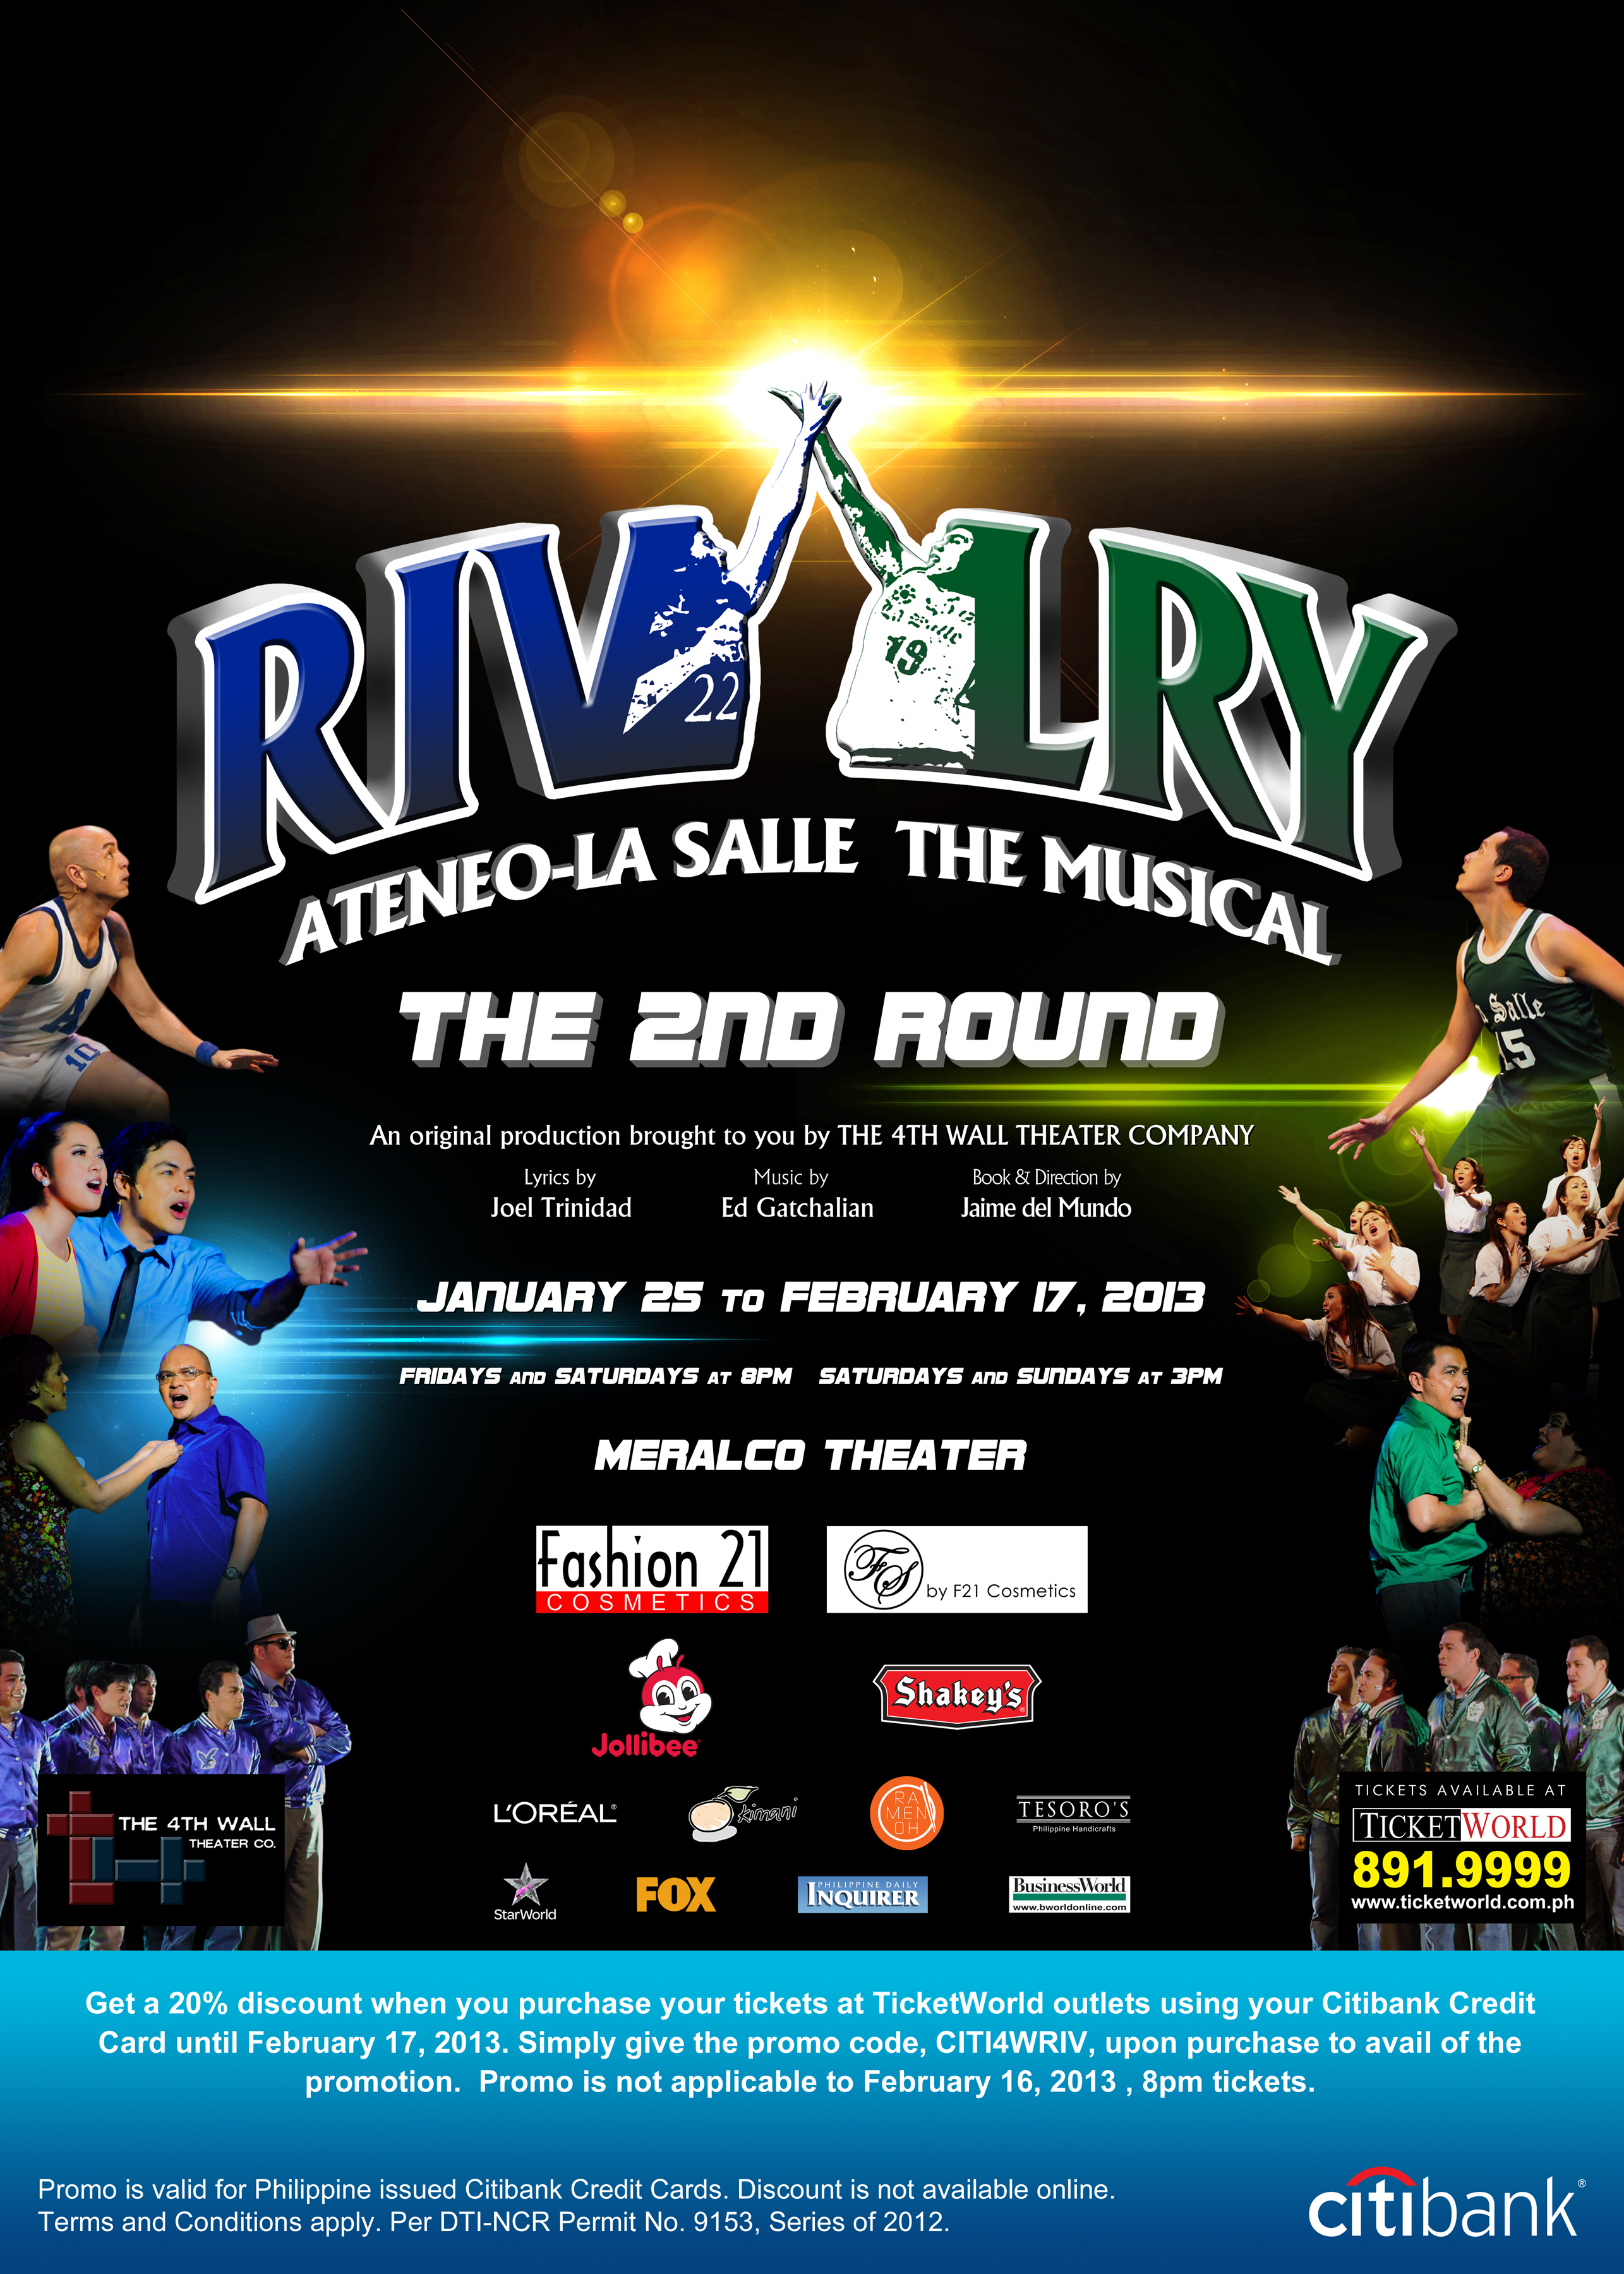 Citibank promo: 20% off on Rivalry: The 2nd Round tickets from Ticketworld January - February 2013